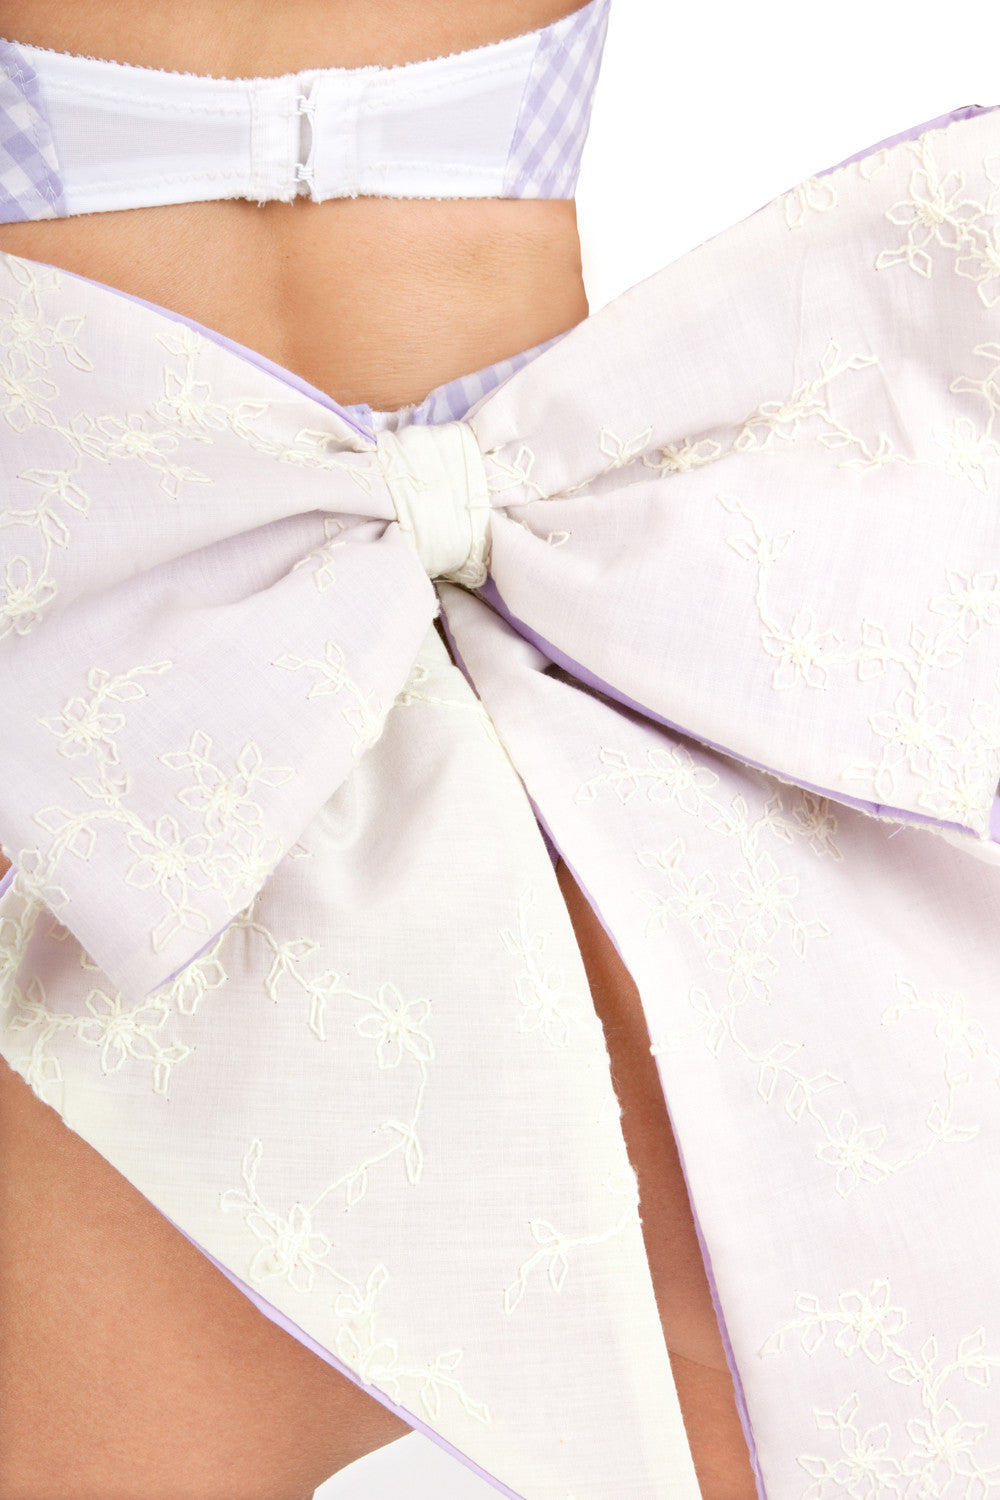 Half Round Front Apron with Bow